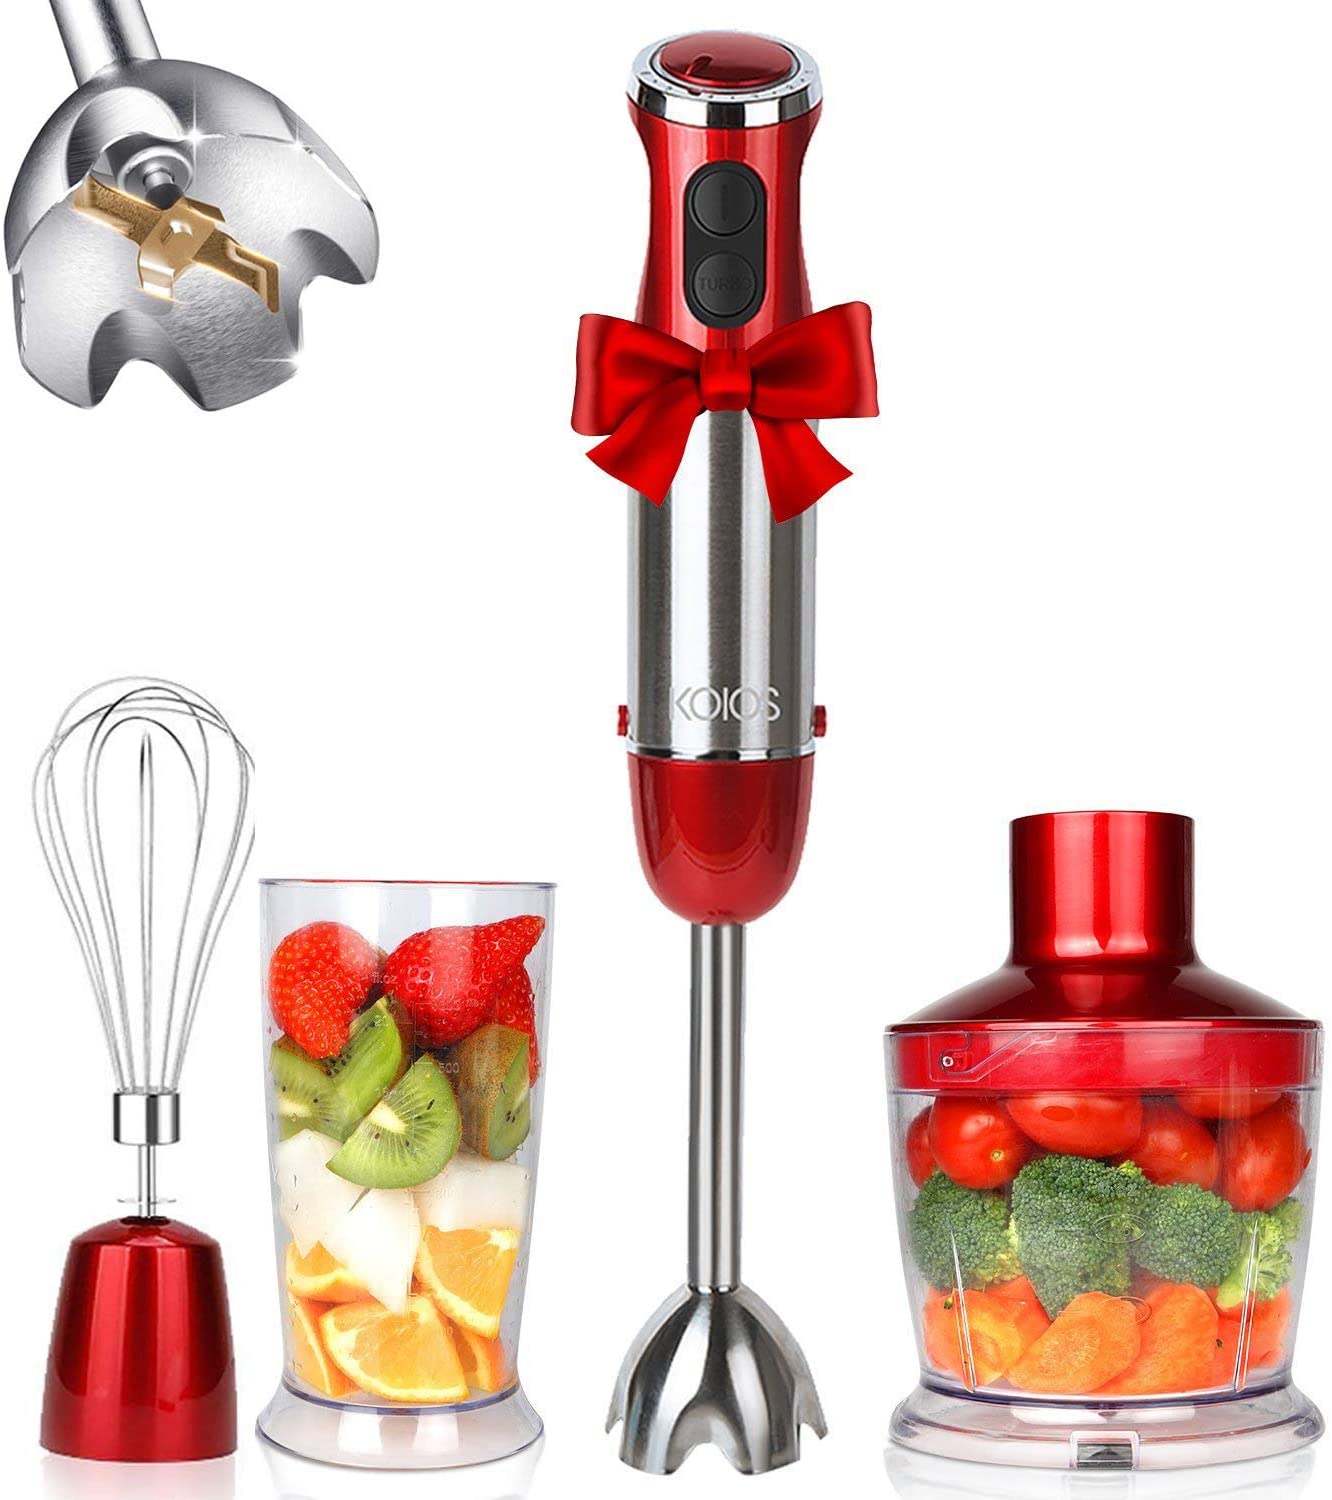 KOIOS 4-In-1 800W Multifunctional Hand Immersion Blender